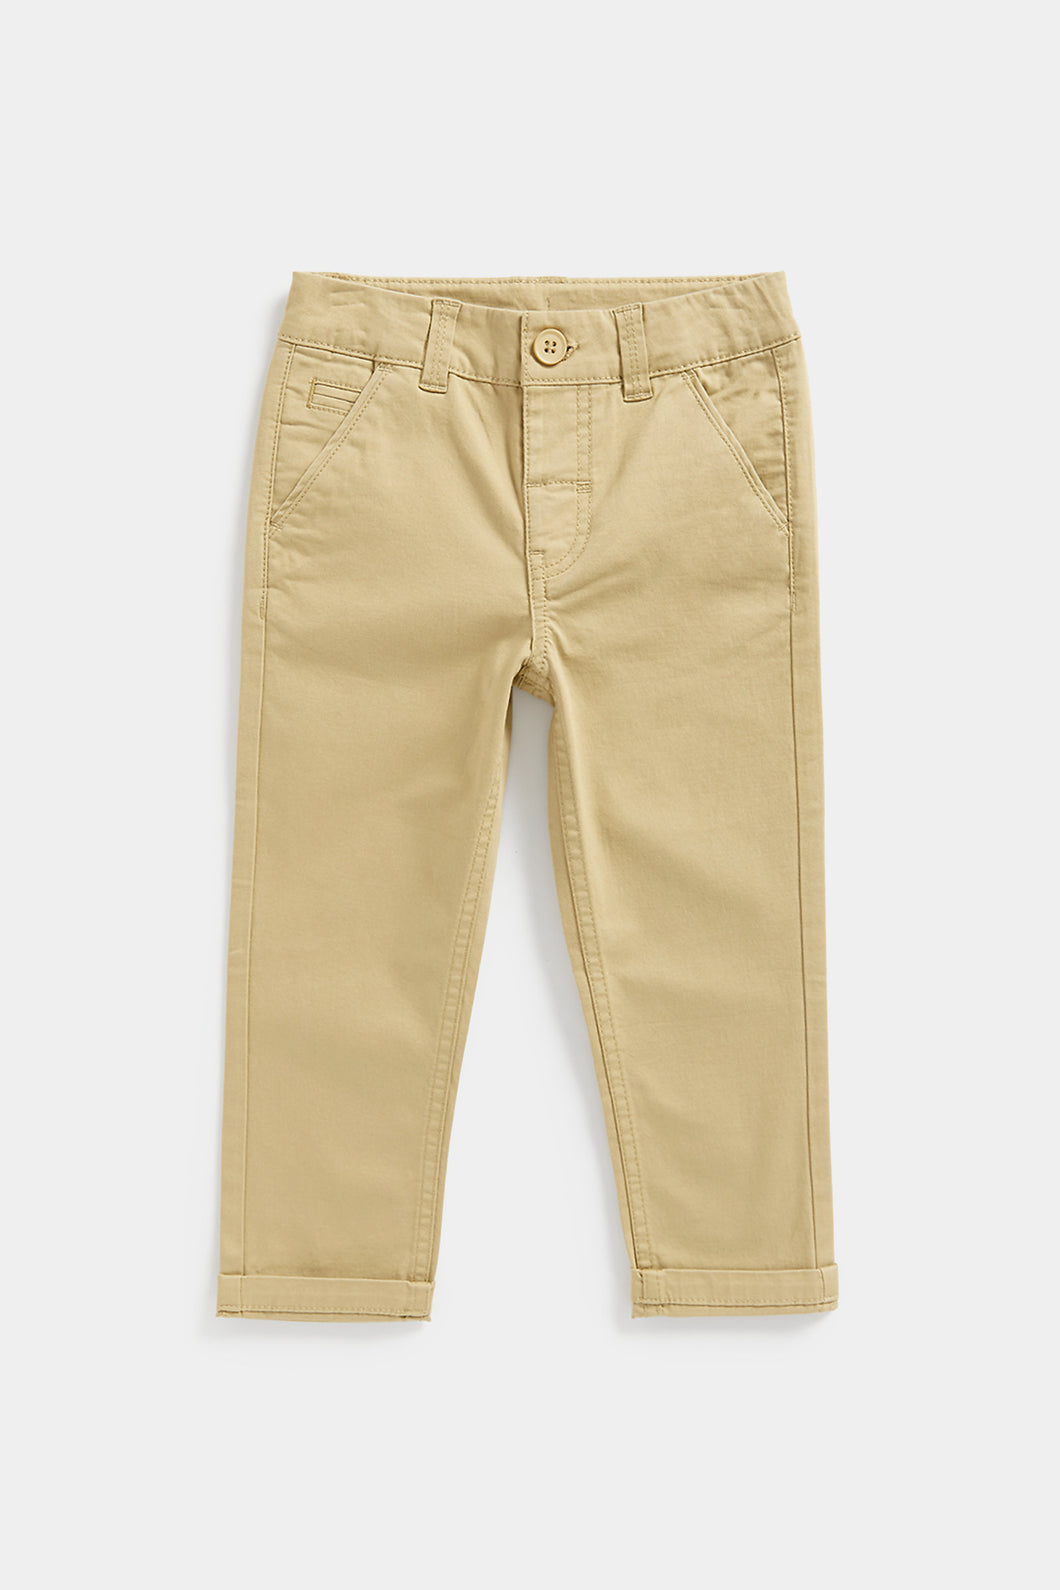 Mothercare Tan Chino Trousers